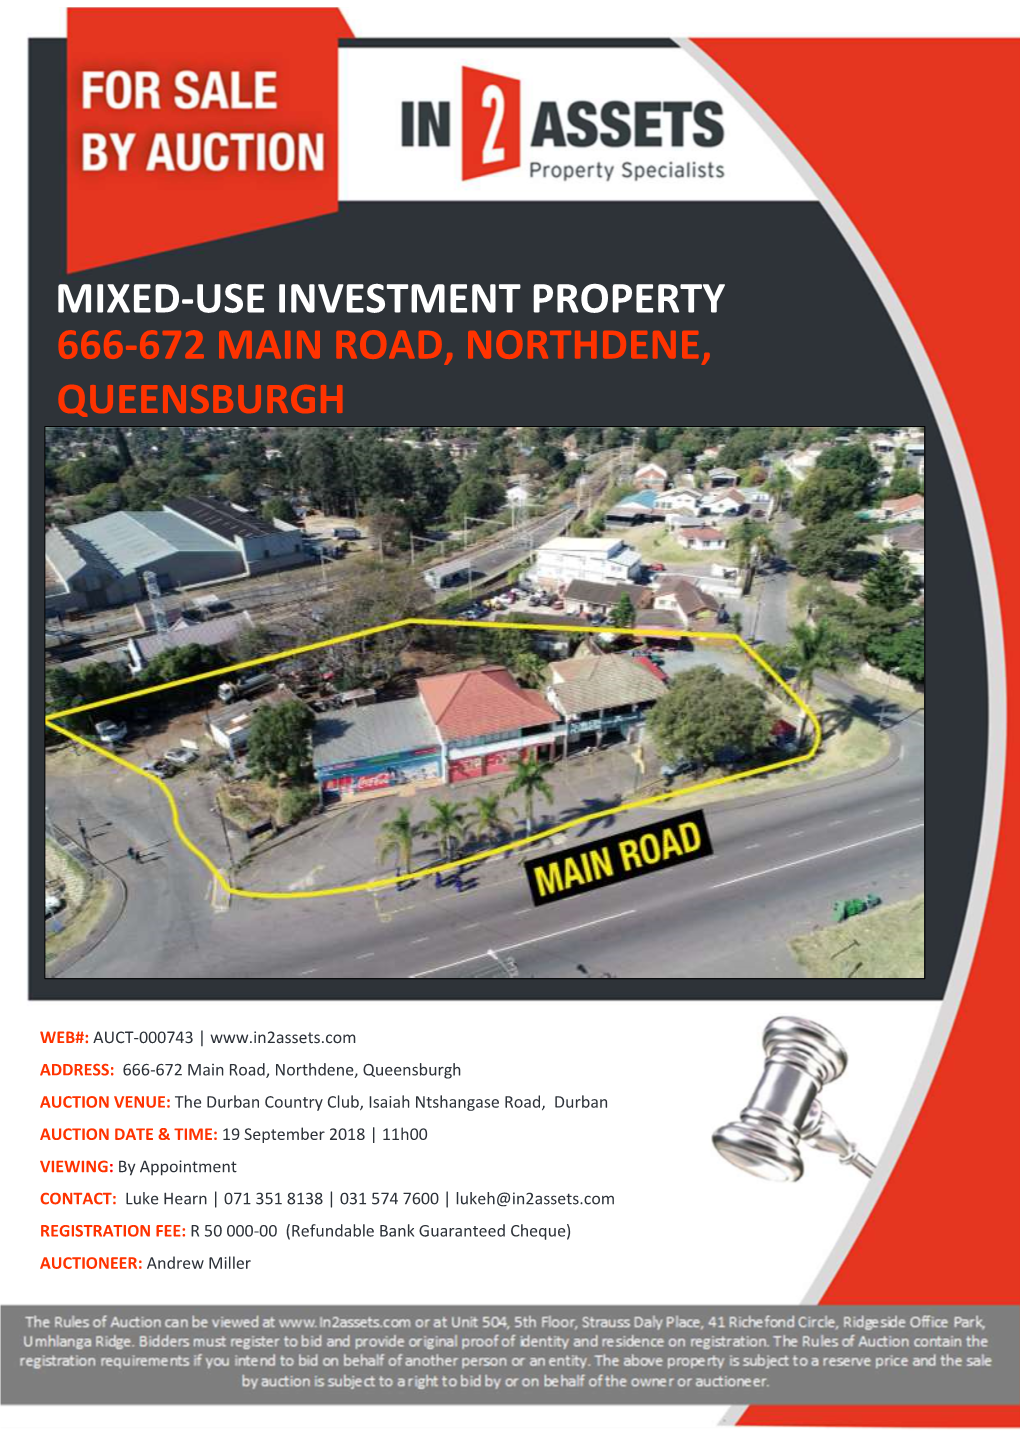 Mixed-Use Investment Property 666-672 Main Road, Northdene, Queensburgh